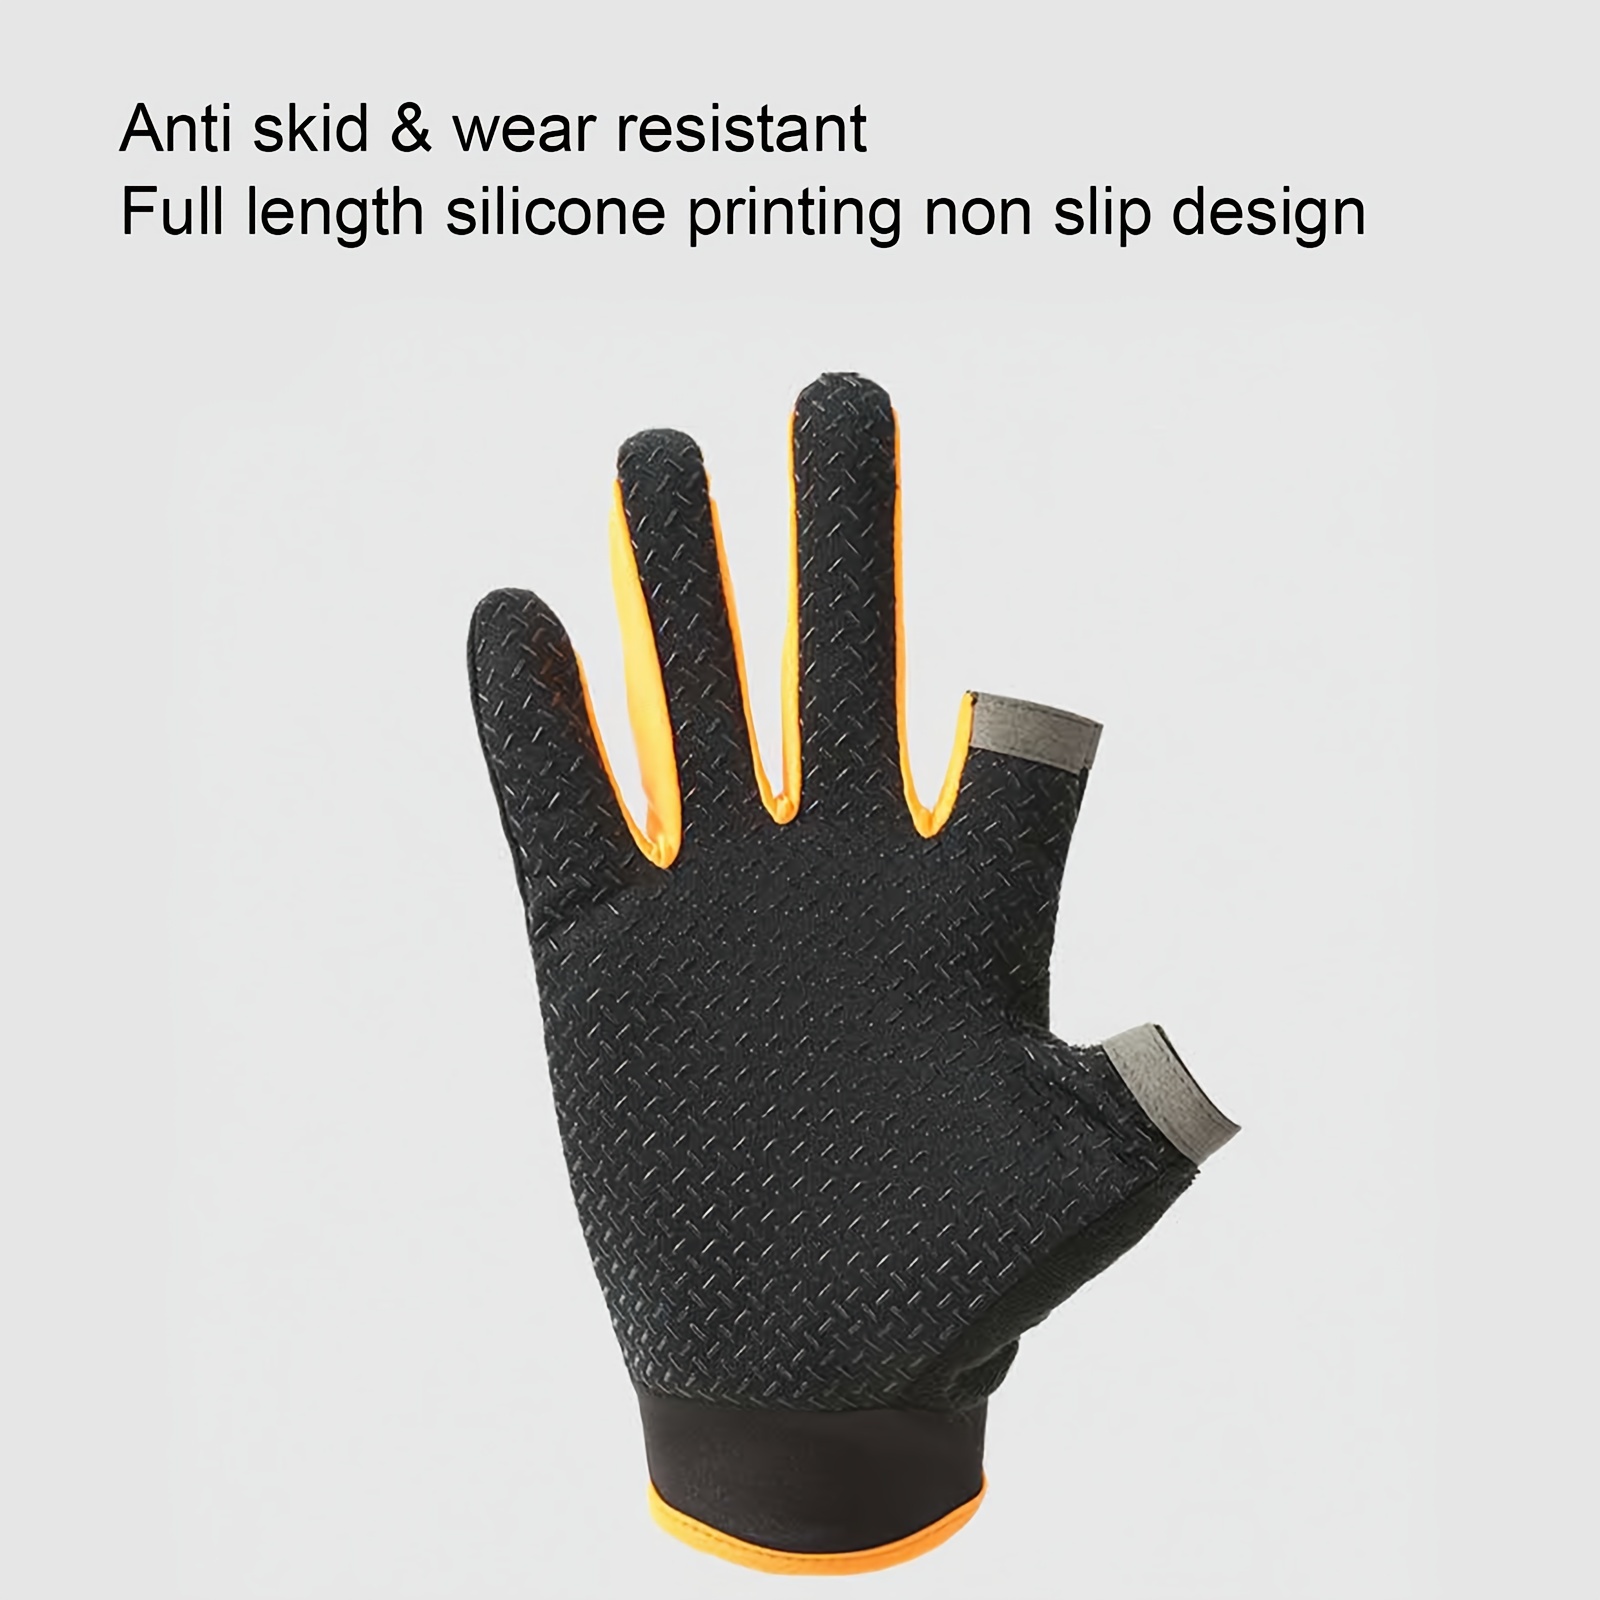 Cut Resistant Fishing Gloves, Two Finger Fishing Gloves